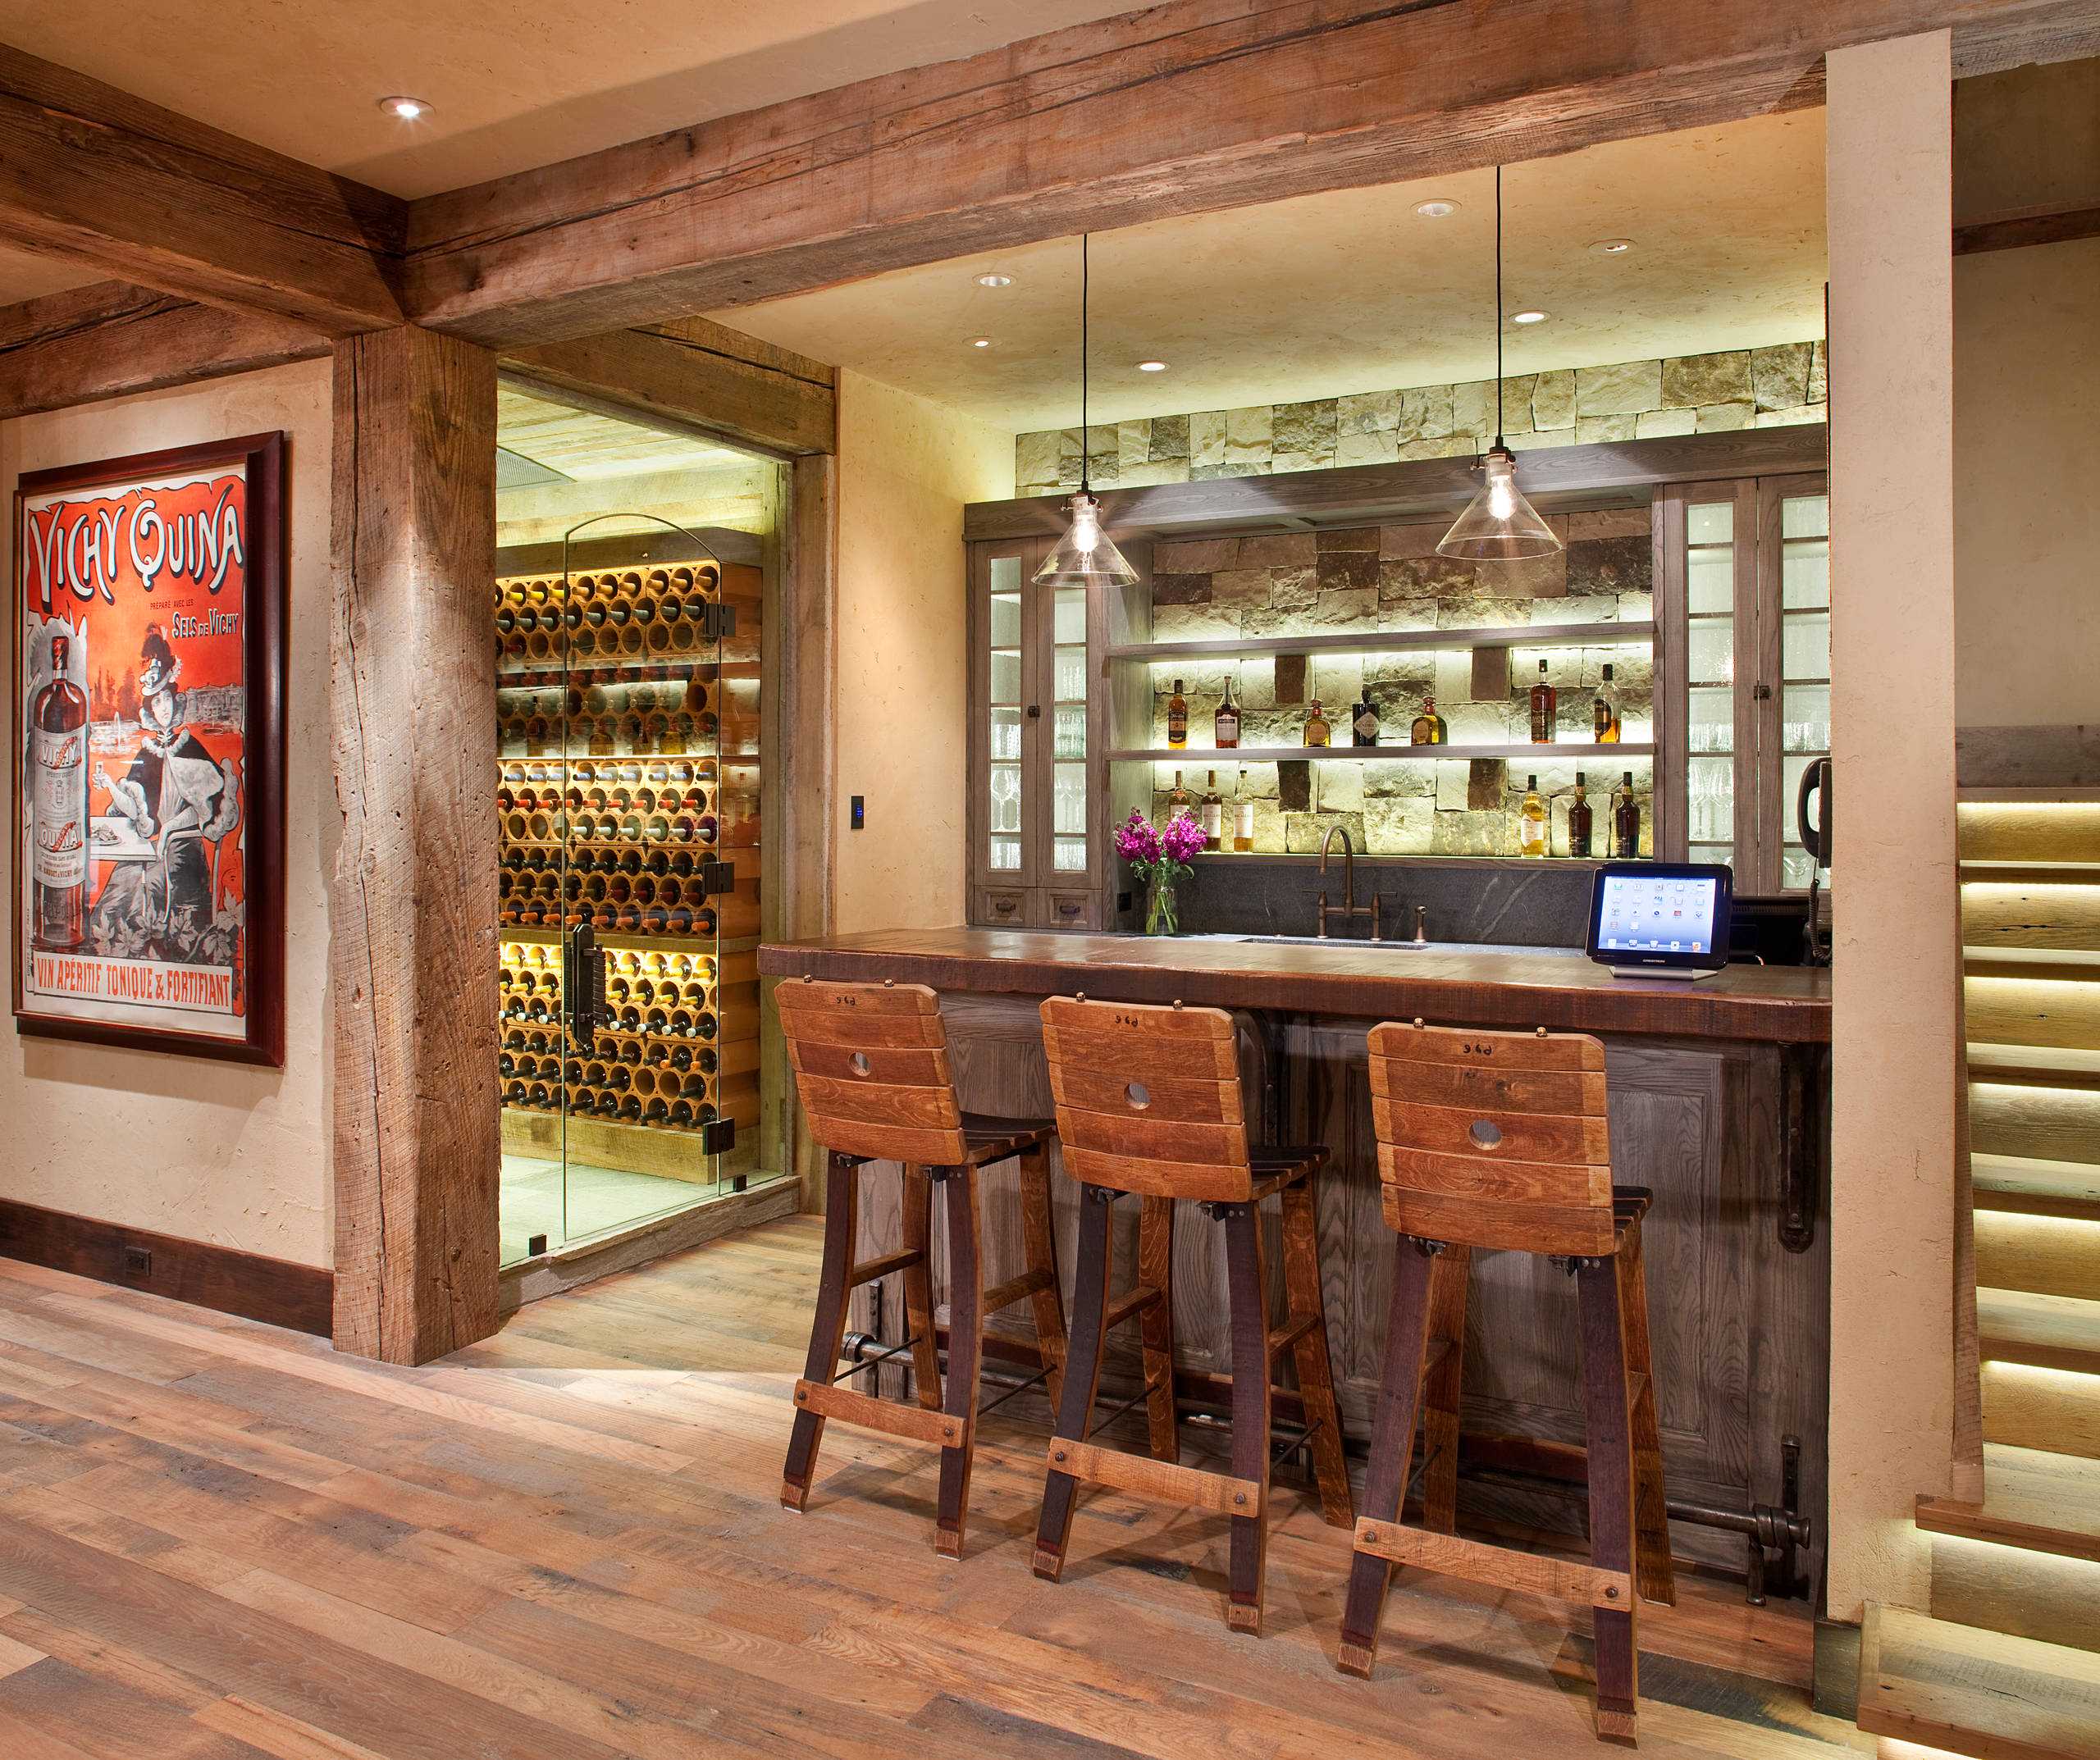 15 Distinguished Rustic Home Bar Designs For When You Really Need That Drink 9 